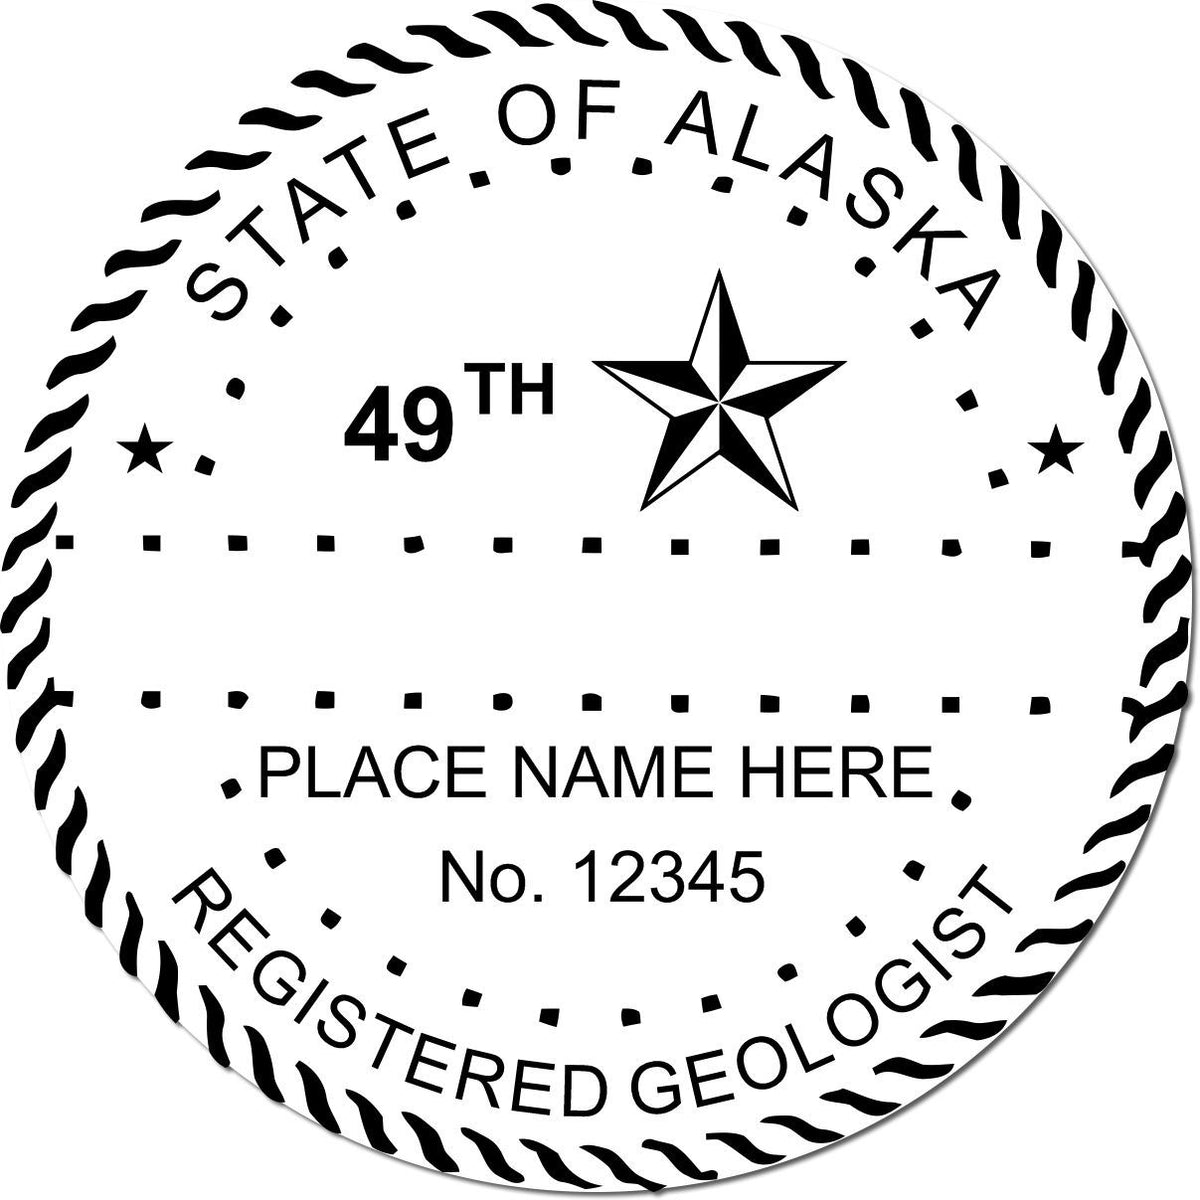 An alternative view of the Premium MaxLight Pre-Inked Alaska Geology Stamp stamped on a sheet of paper showing the image in use